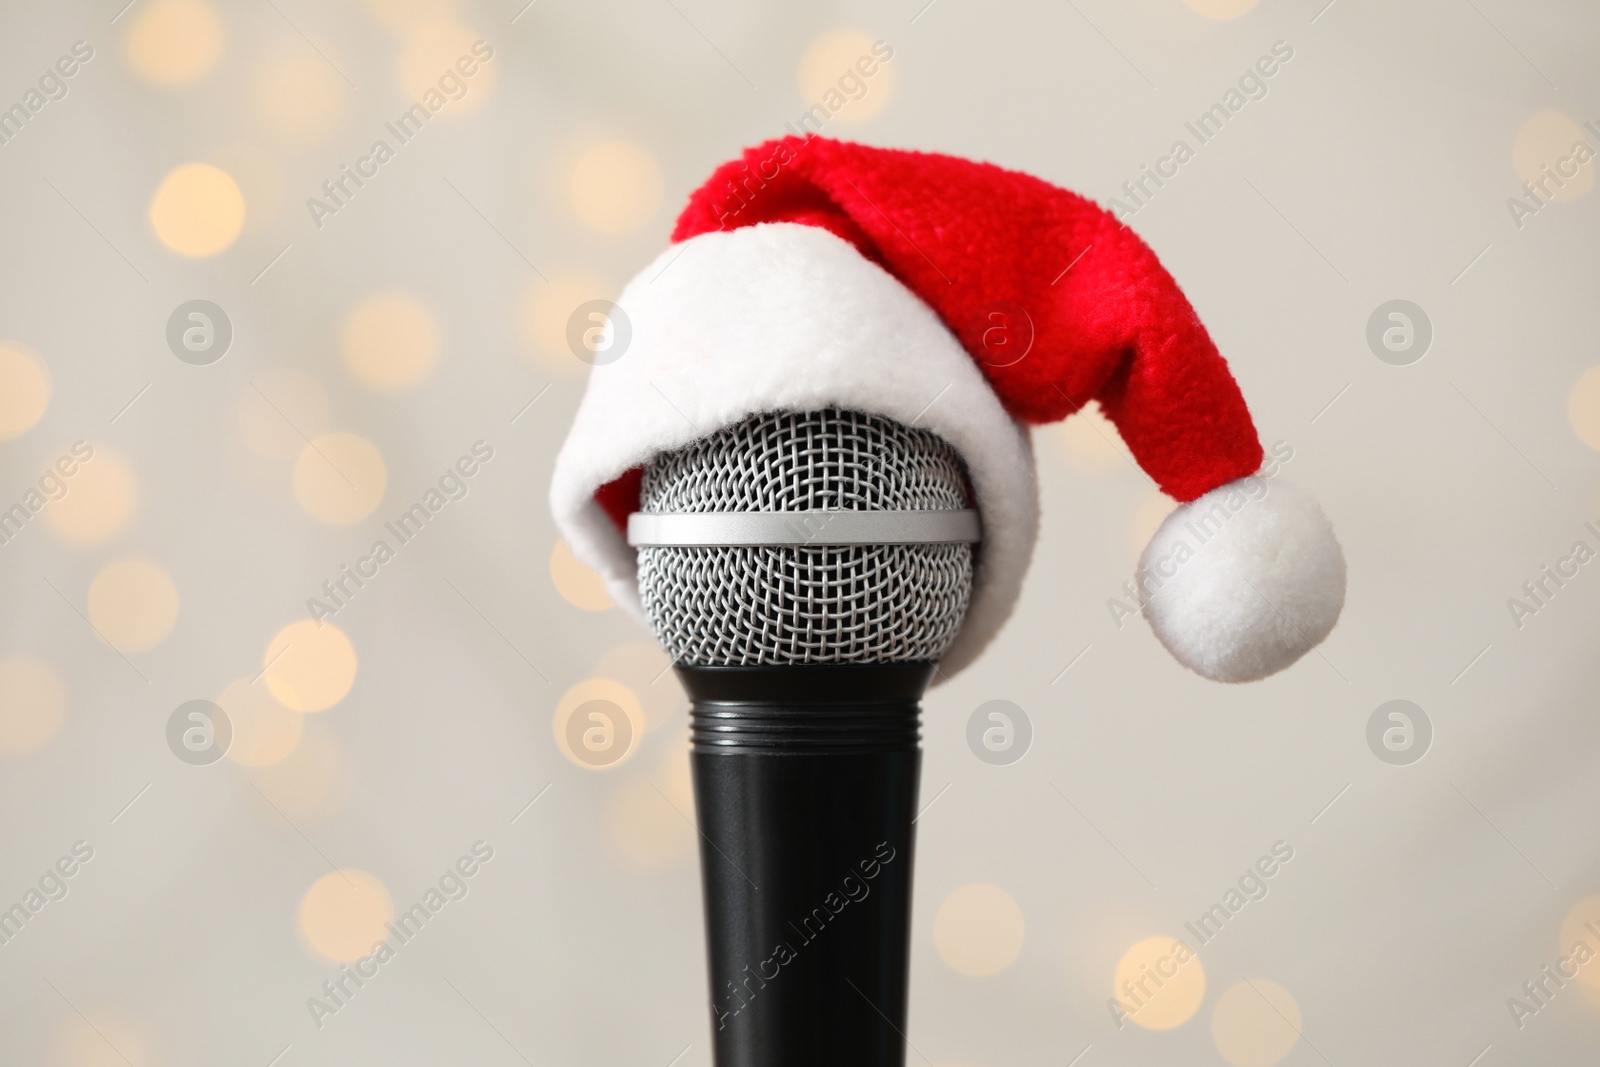 Photo of Microphone with Santa hat against blurred lights. Christmas music